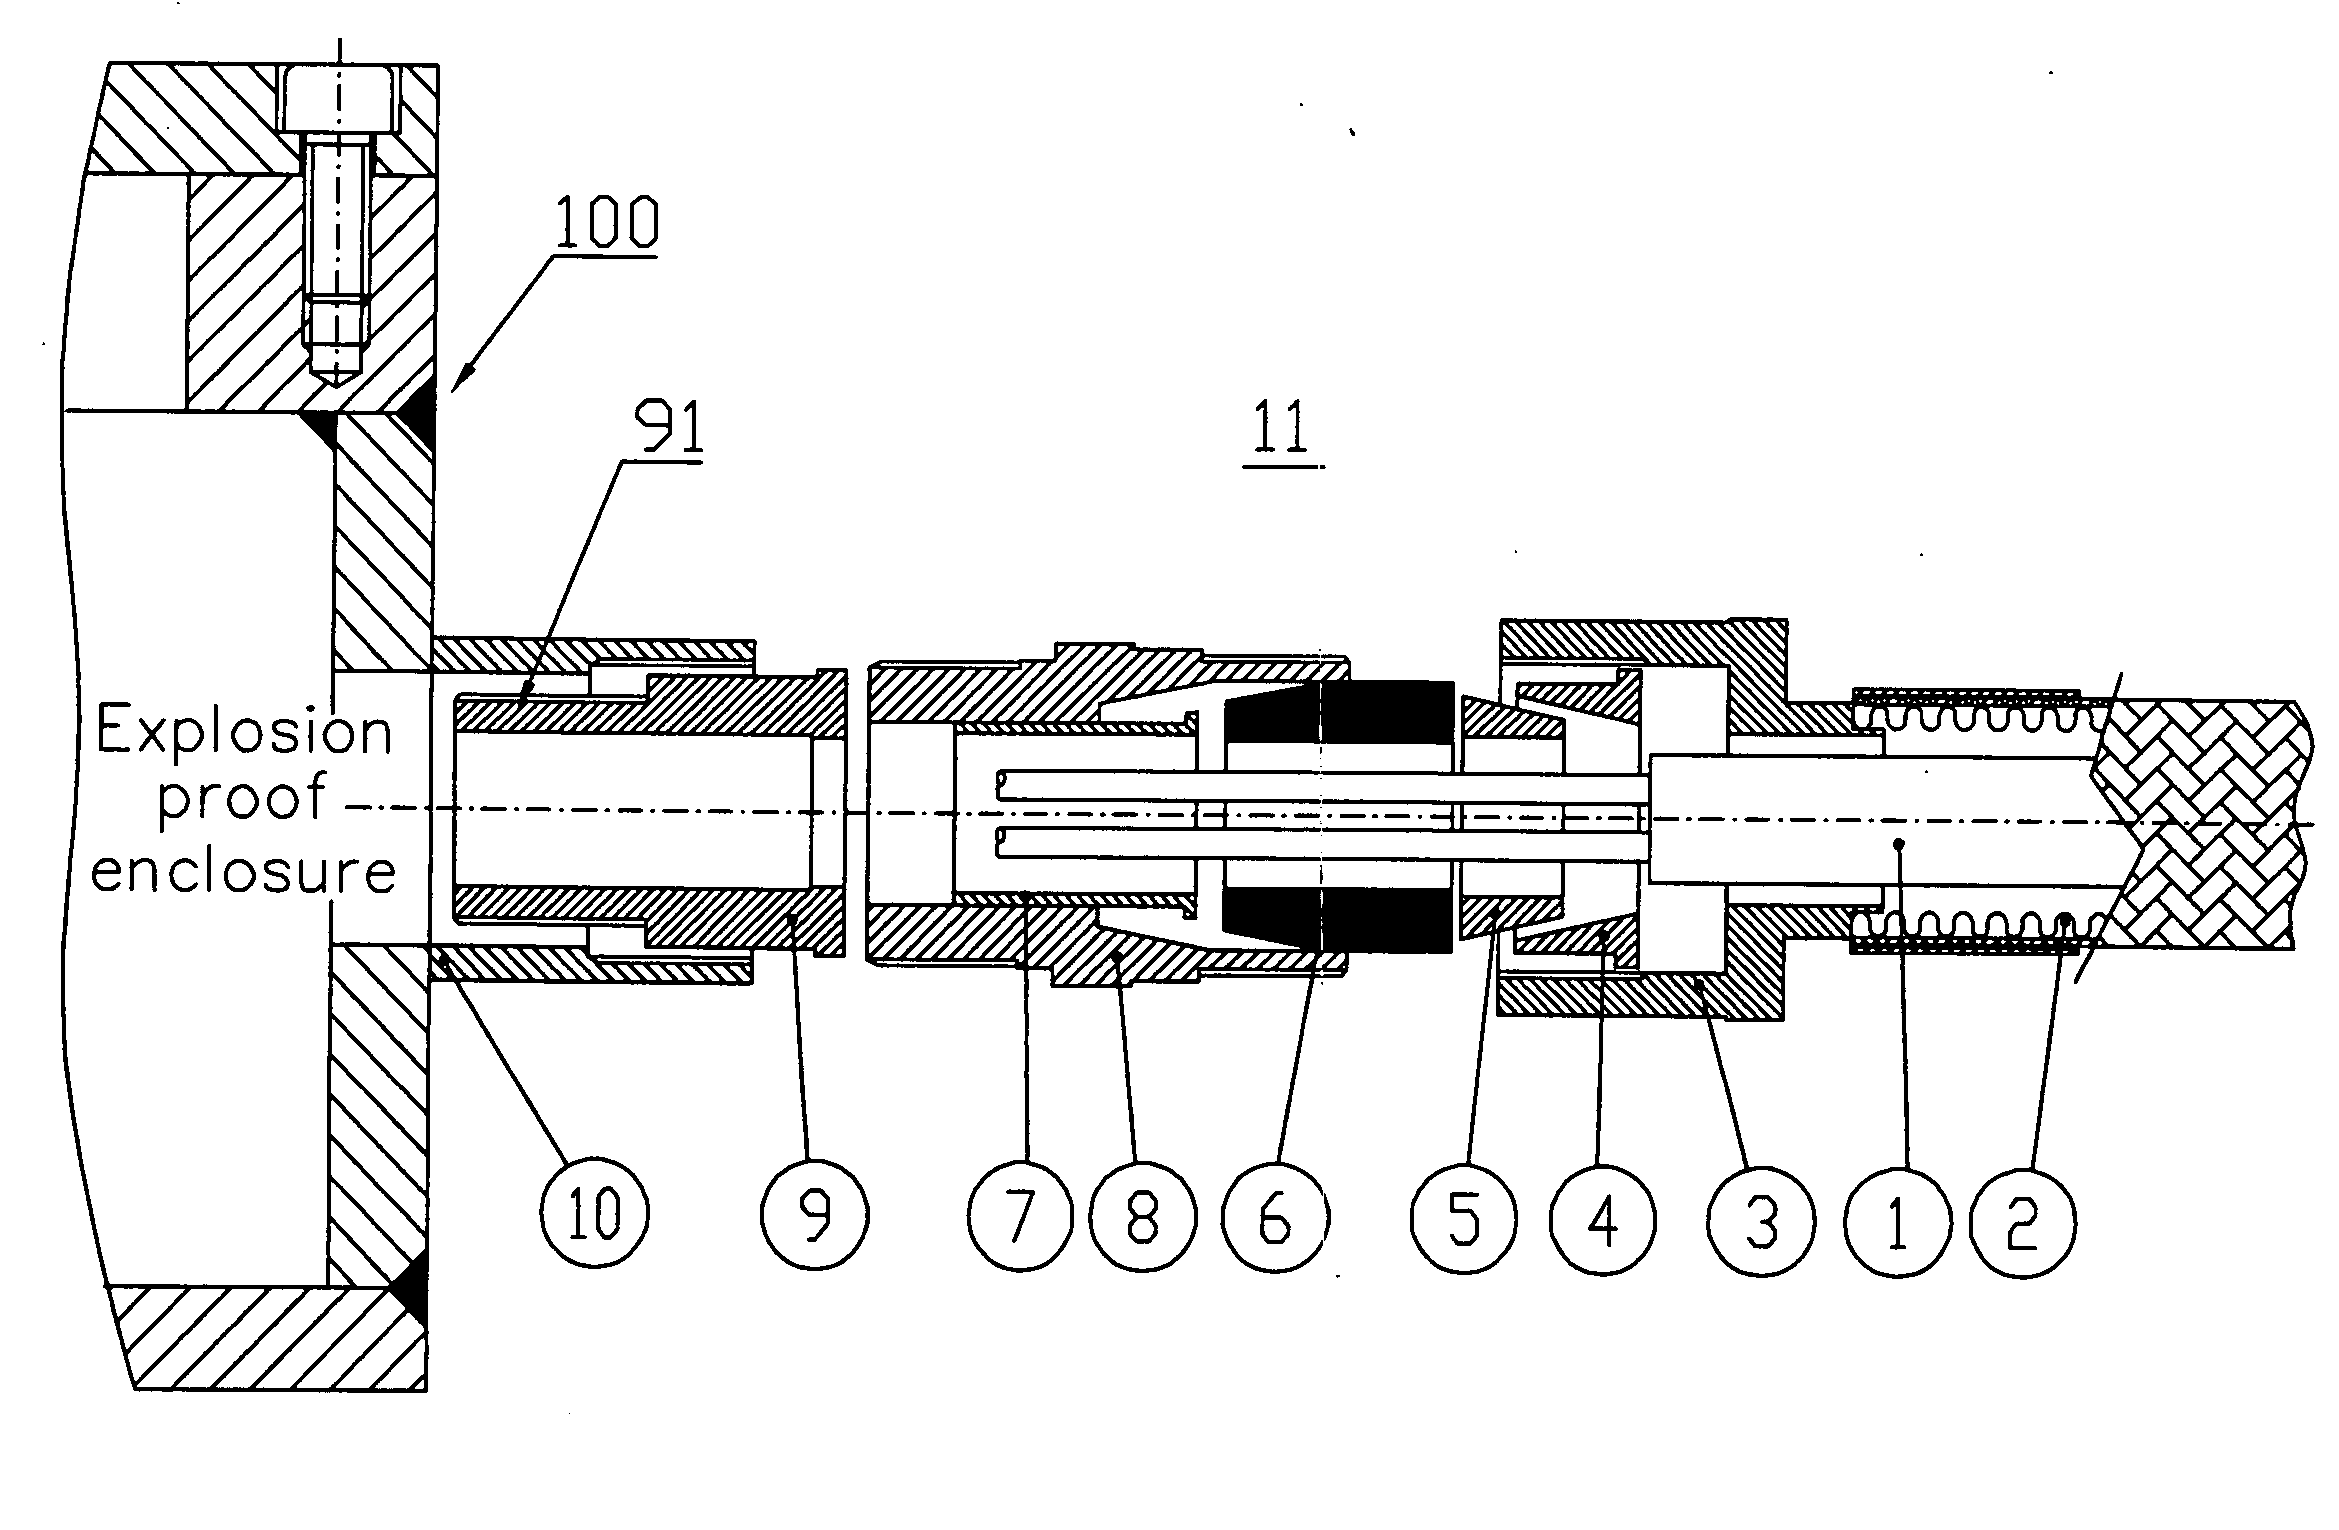 Connector apparatus and system for explosion proof engine